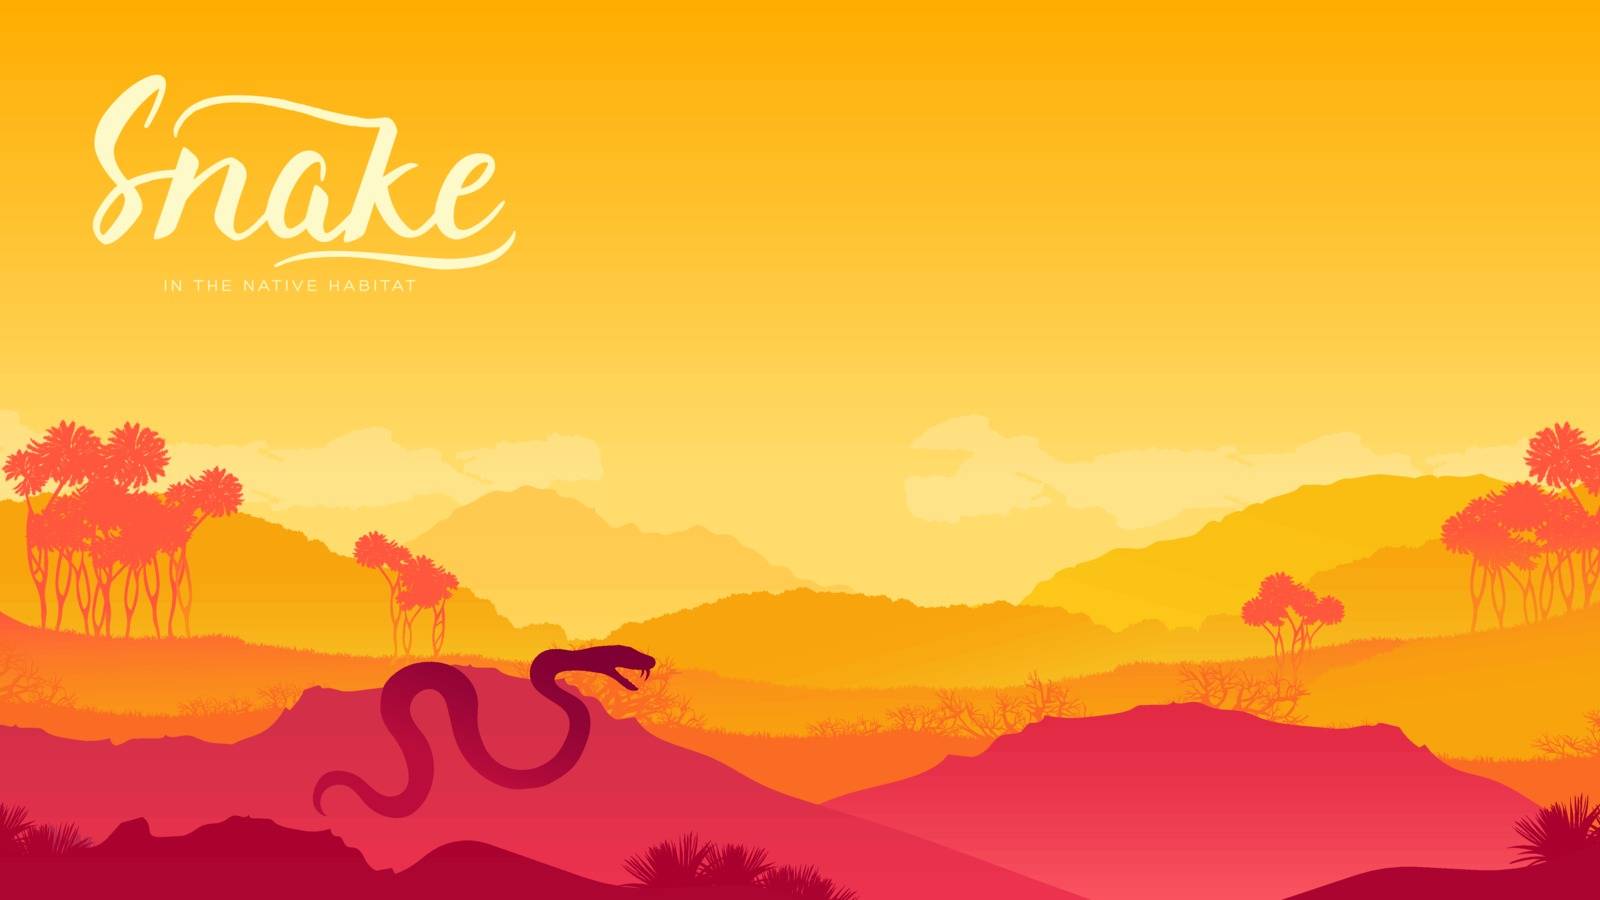 Snake climbed out to bask in the sun background. Dangerous predator in the desert traces a victim design. Reptile to prepare for attack illustration